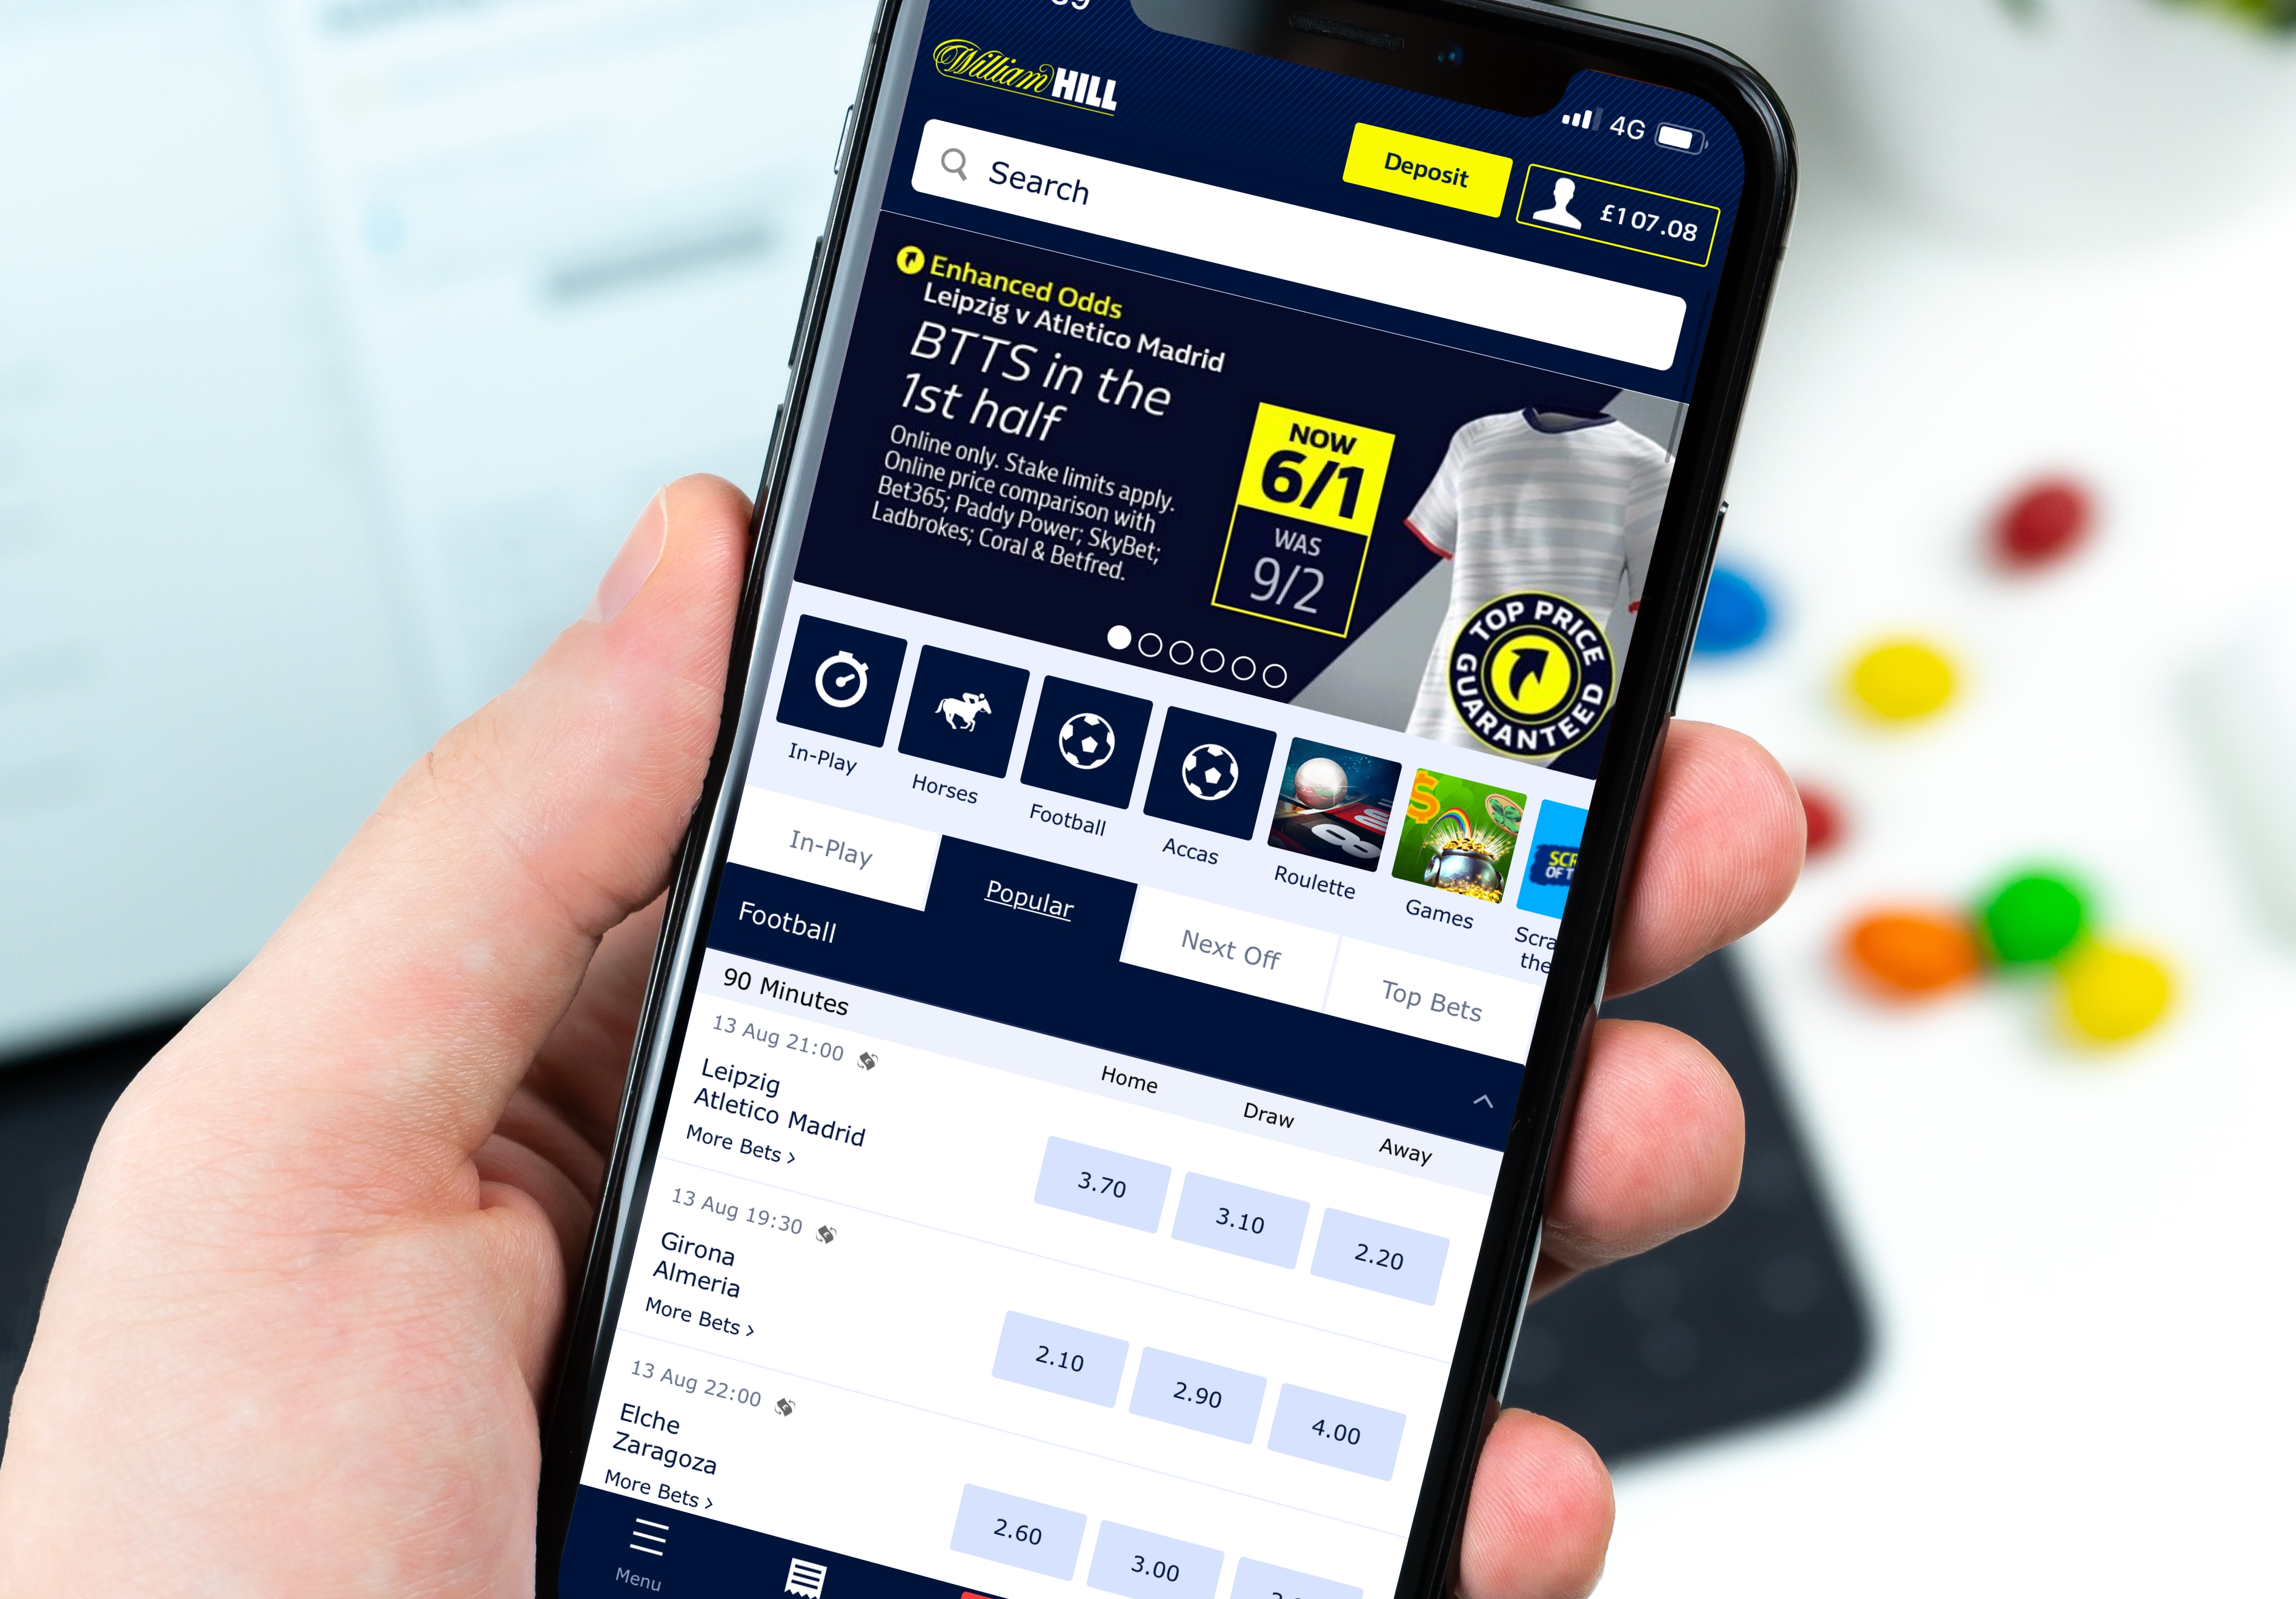 william hill betting review